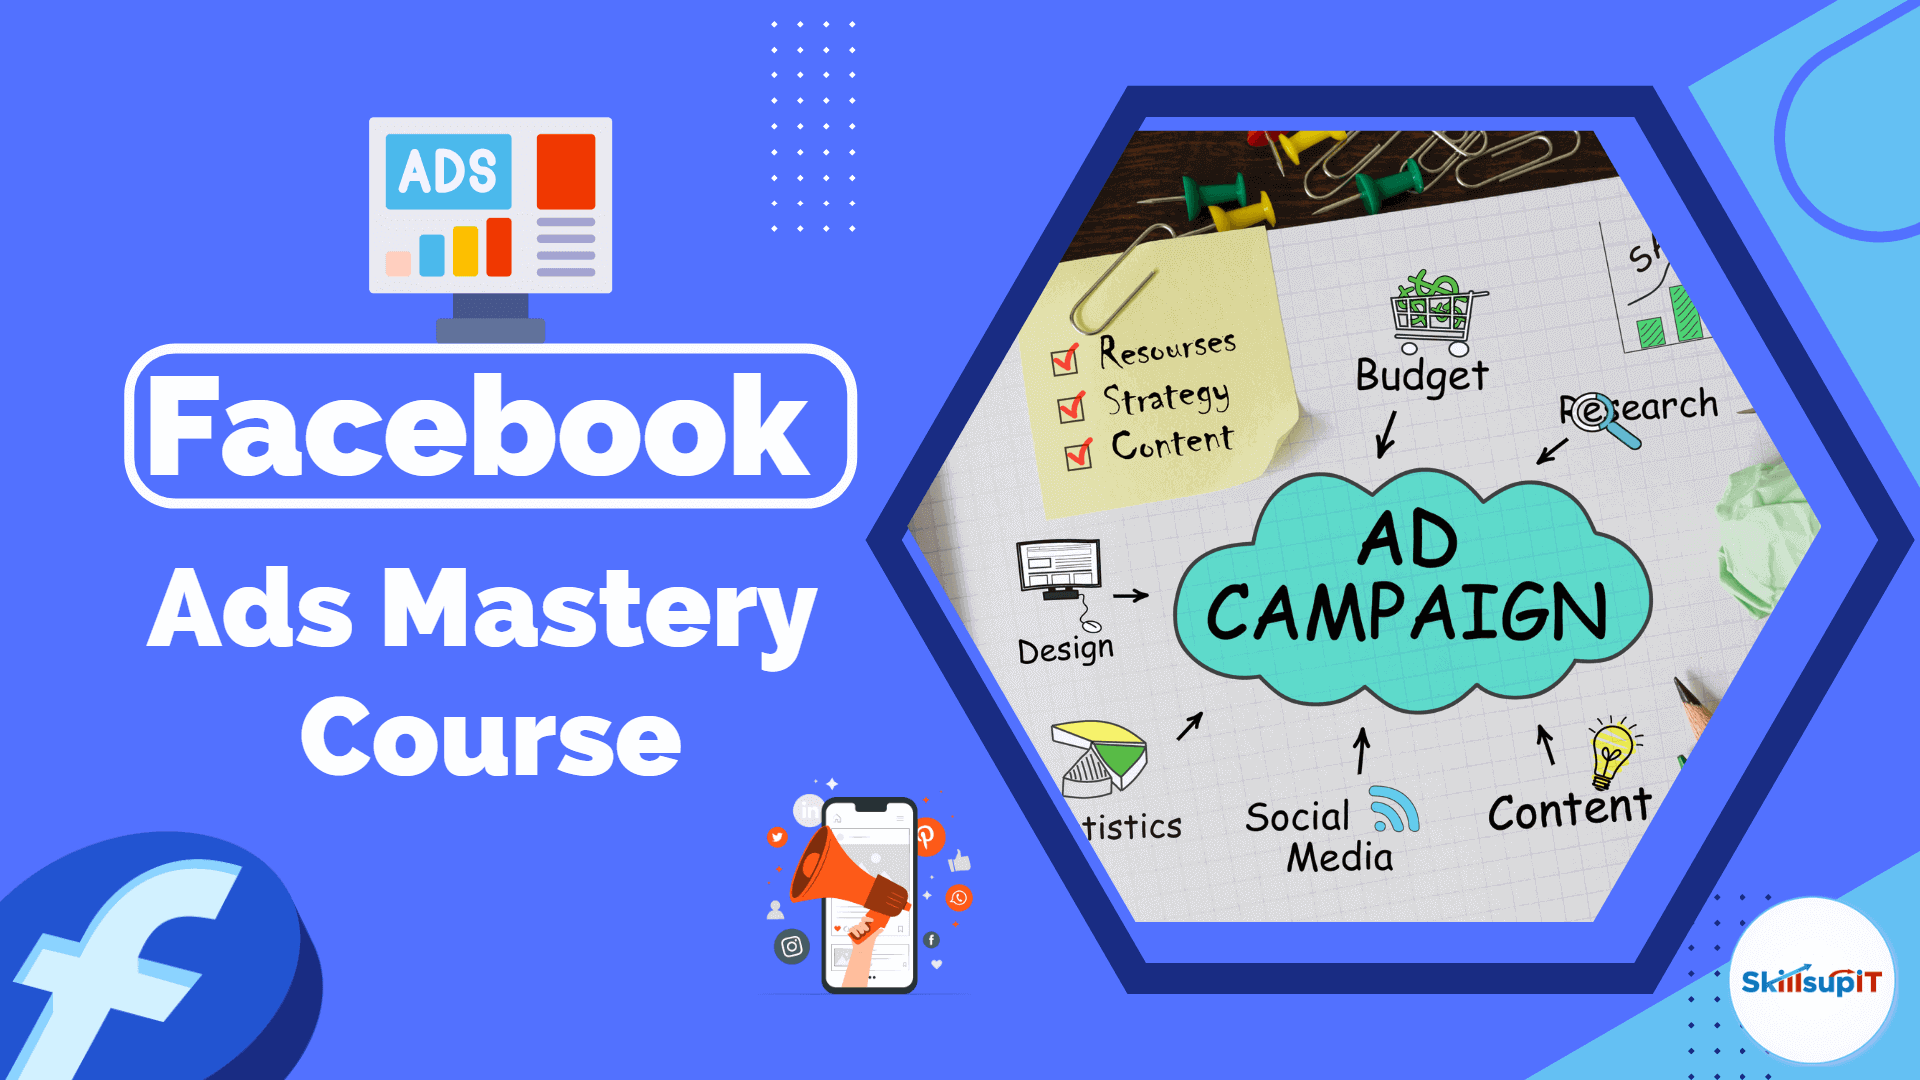 Facebook-ads-Mastery-course-Skillsupit